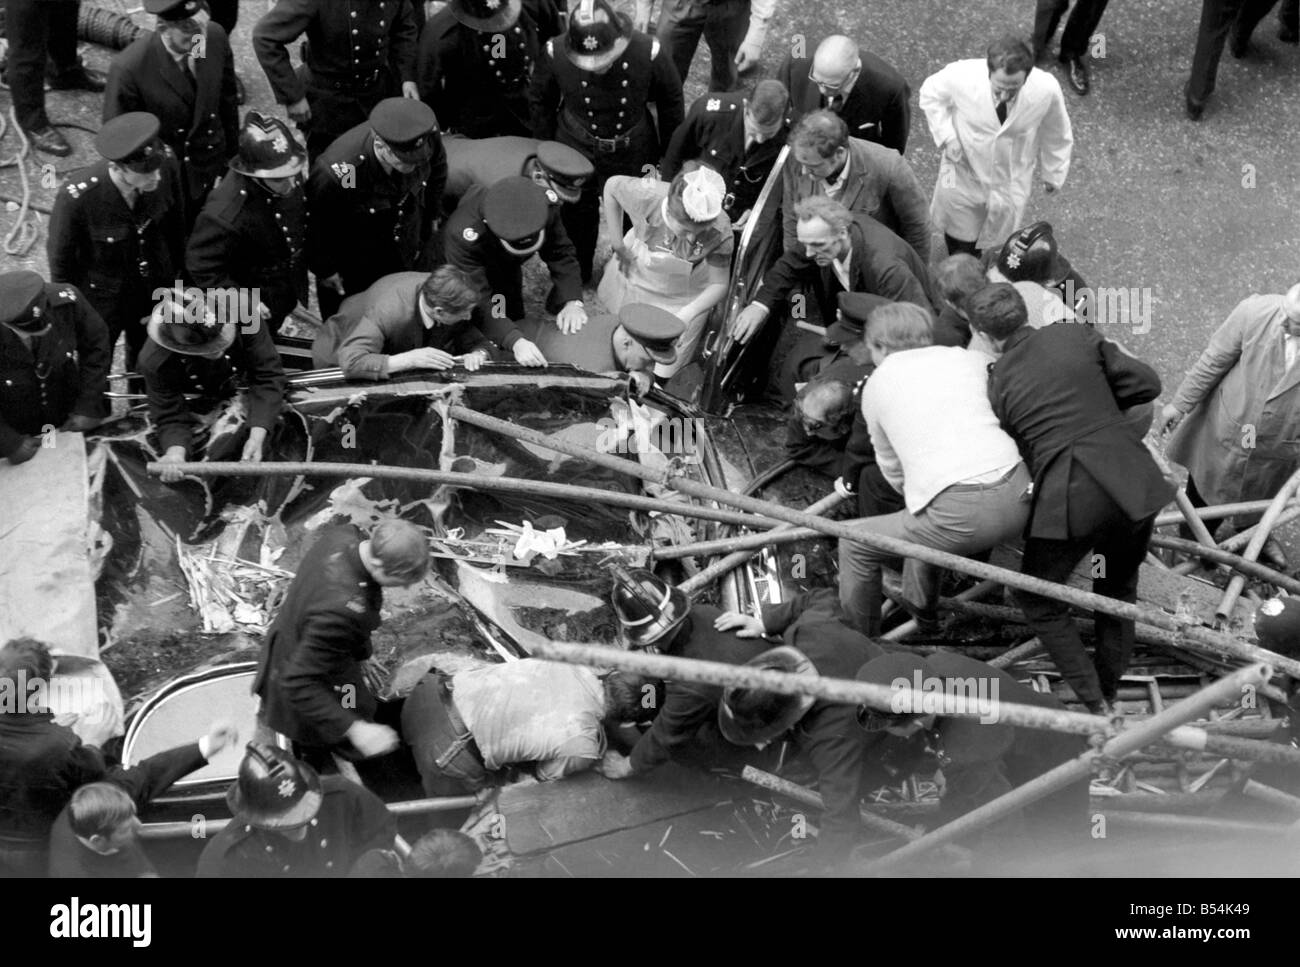 Police and fireman swarm at the scene where a 100ft framework of Scaffolding collapsed on to a Daimler limousine, killing Sir David Rose, Governor General of Guyana. ;November 1969 ;Z10837 Stock Photo